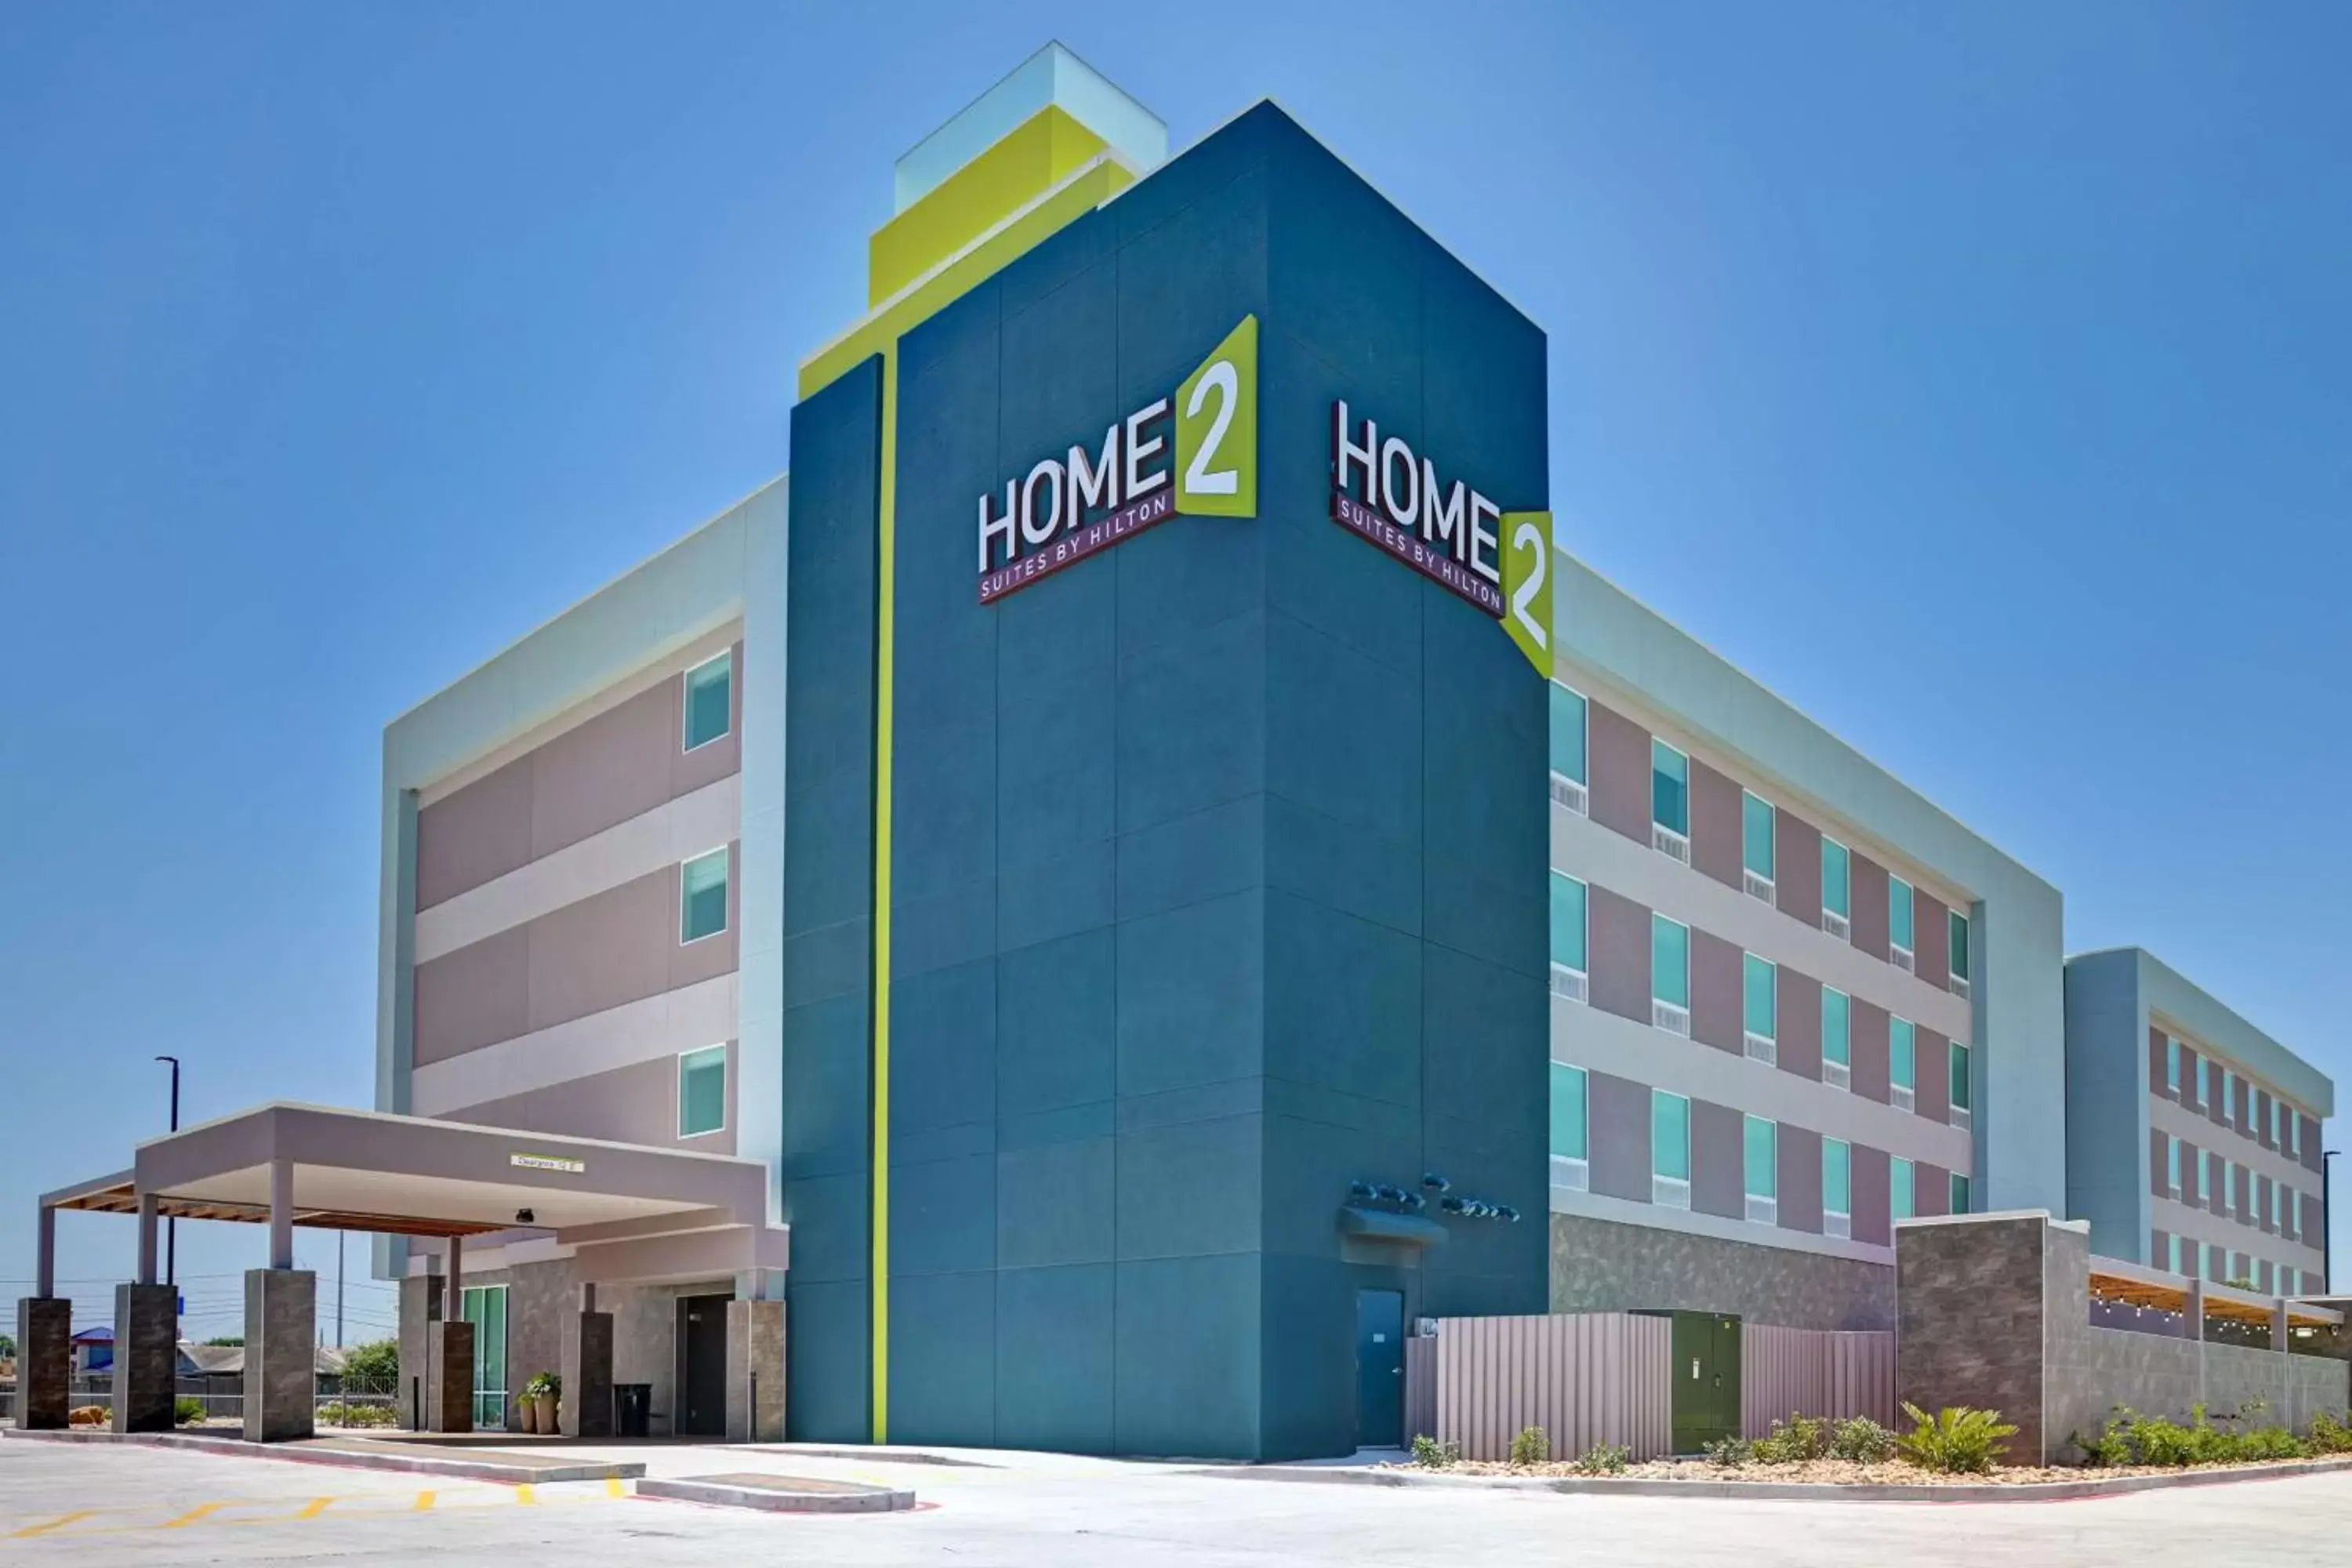 Property Building in Home2 Suites Corpus Christi Southeast, Tx